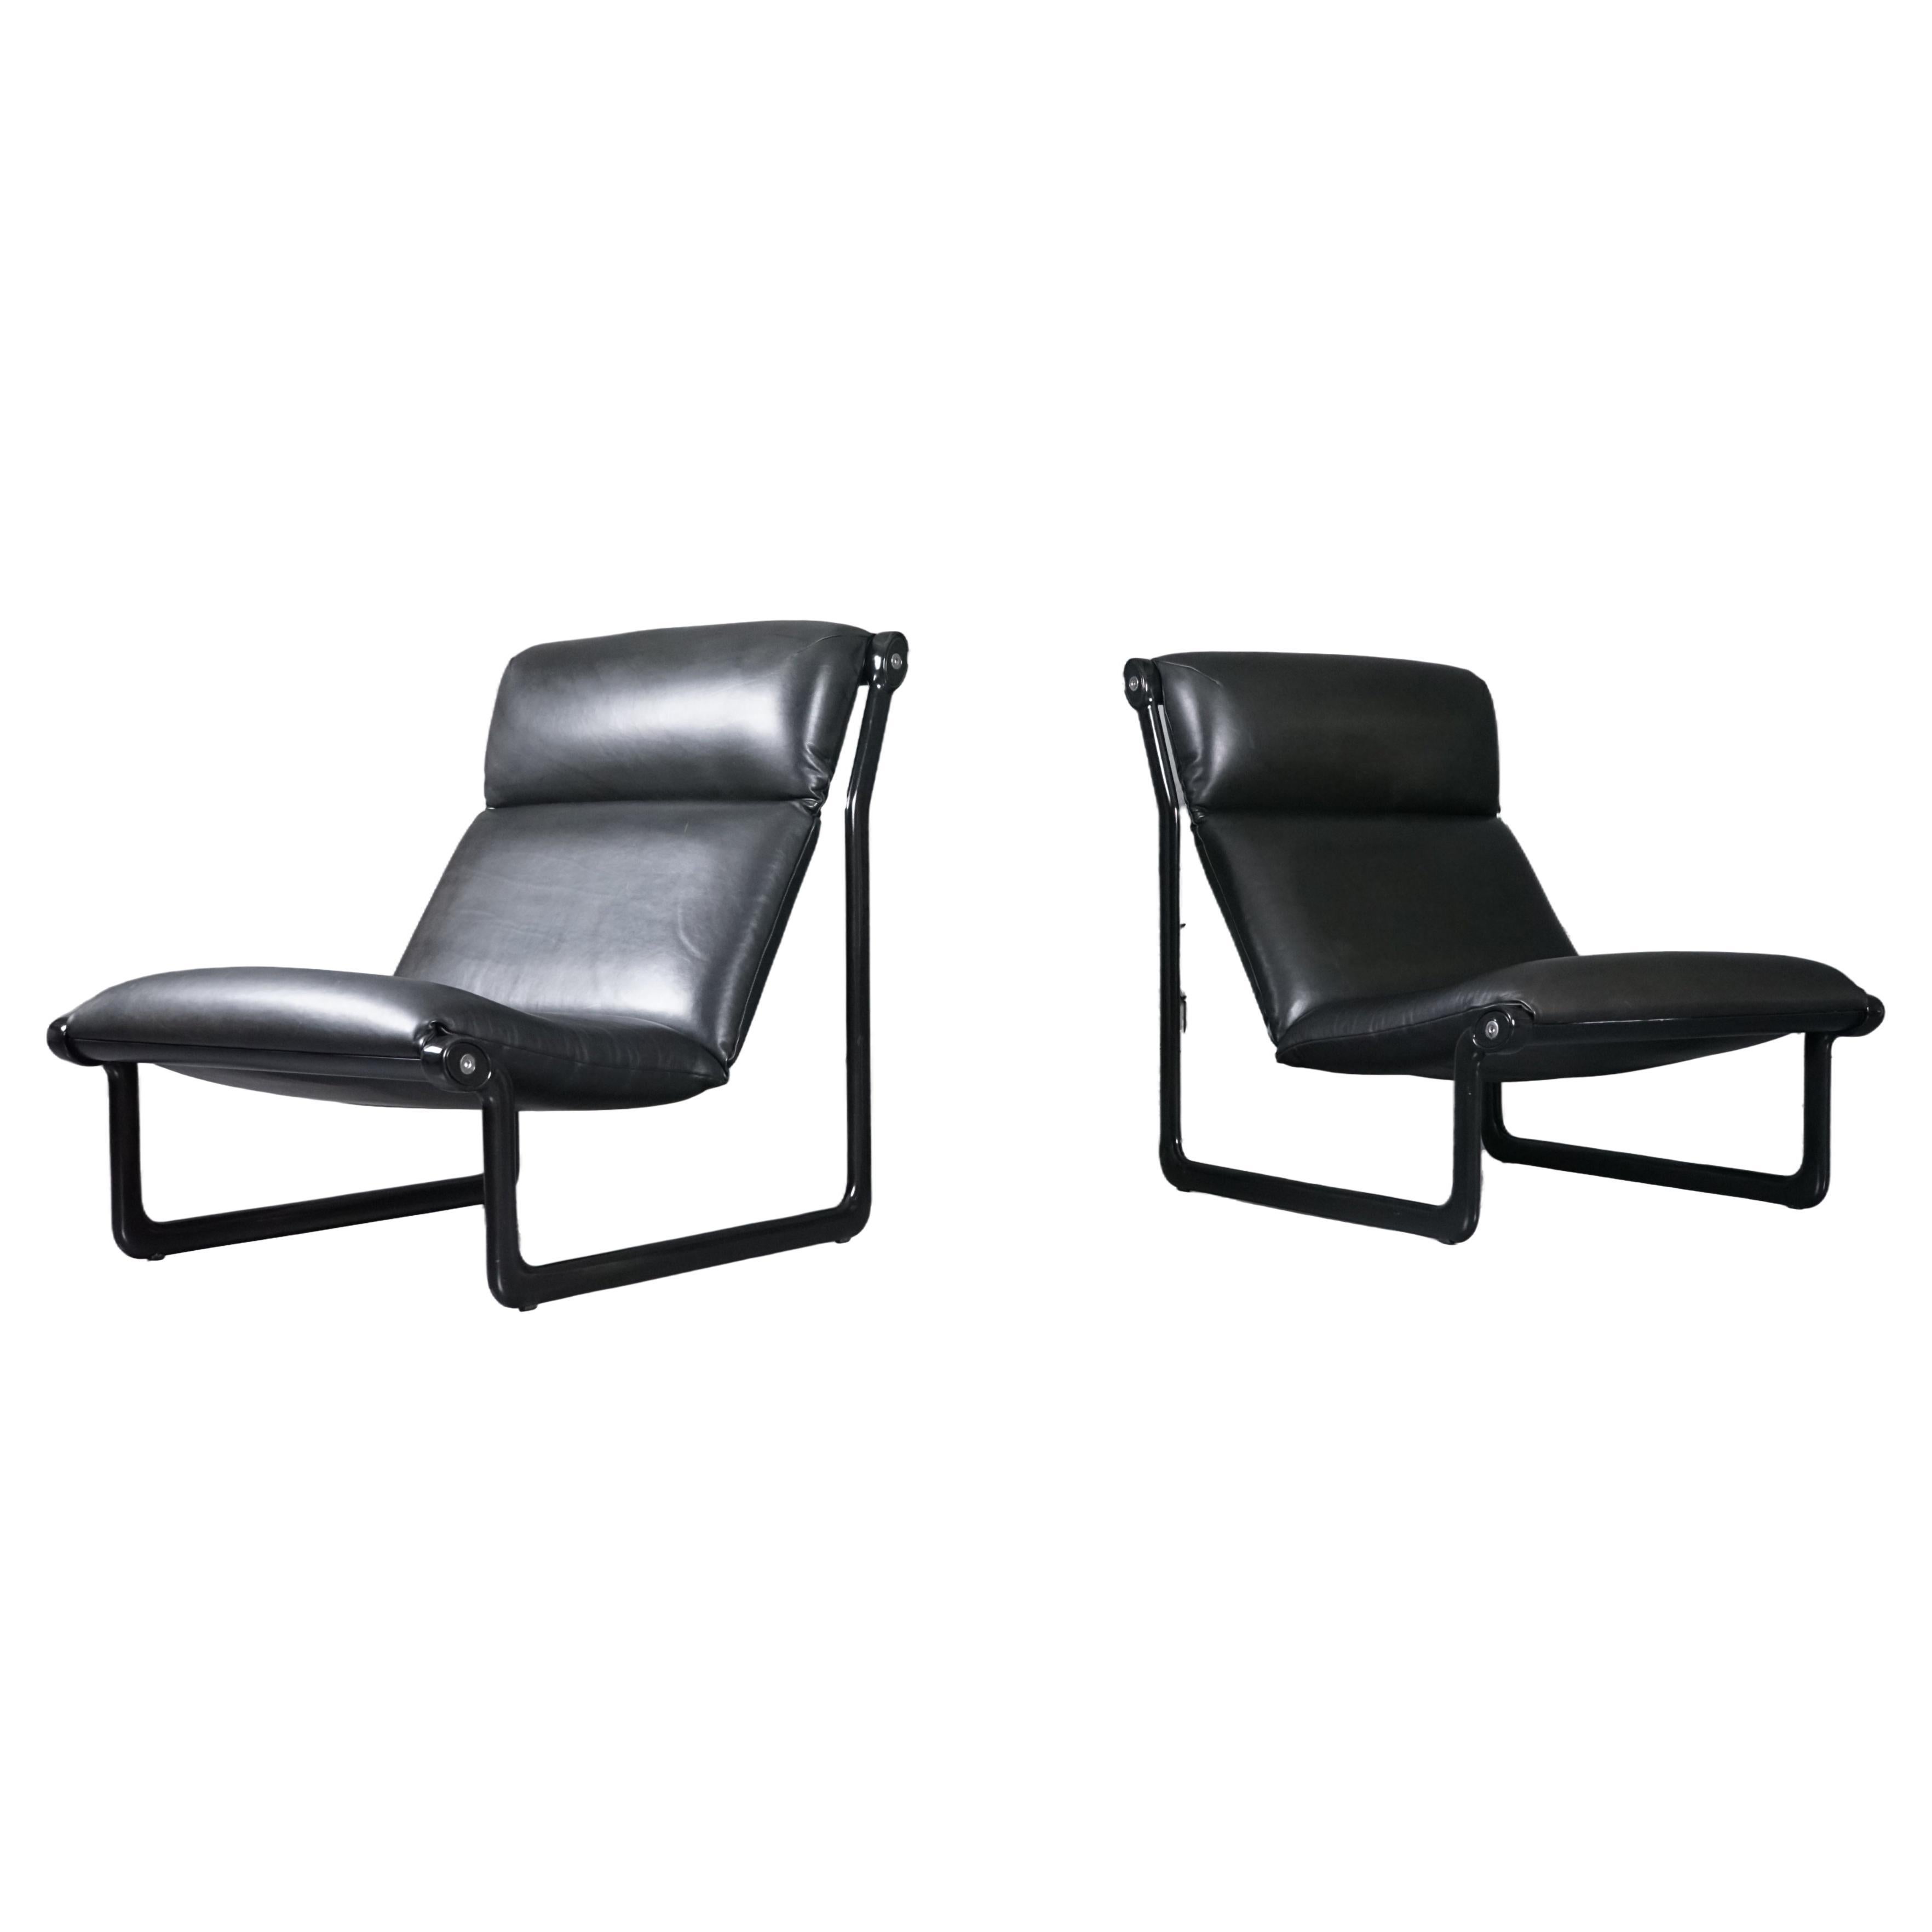 Arm Chair Modell 2001 by Bruce Hannah & Andrew I. Morrison for Knoll Set of 2 For Sale